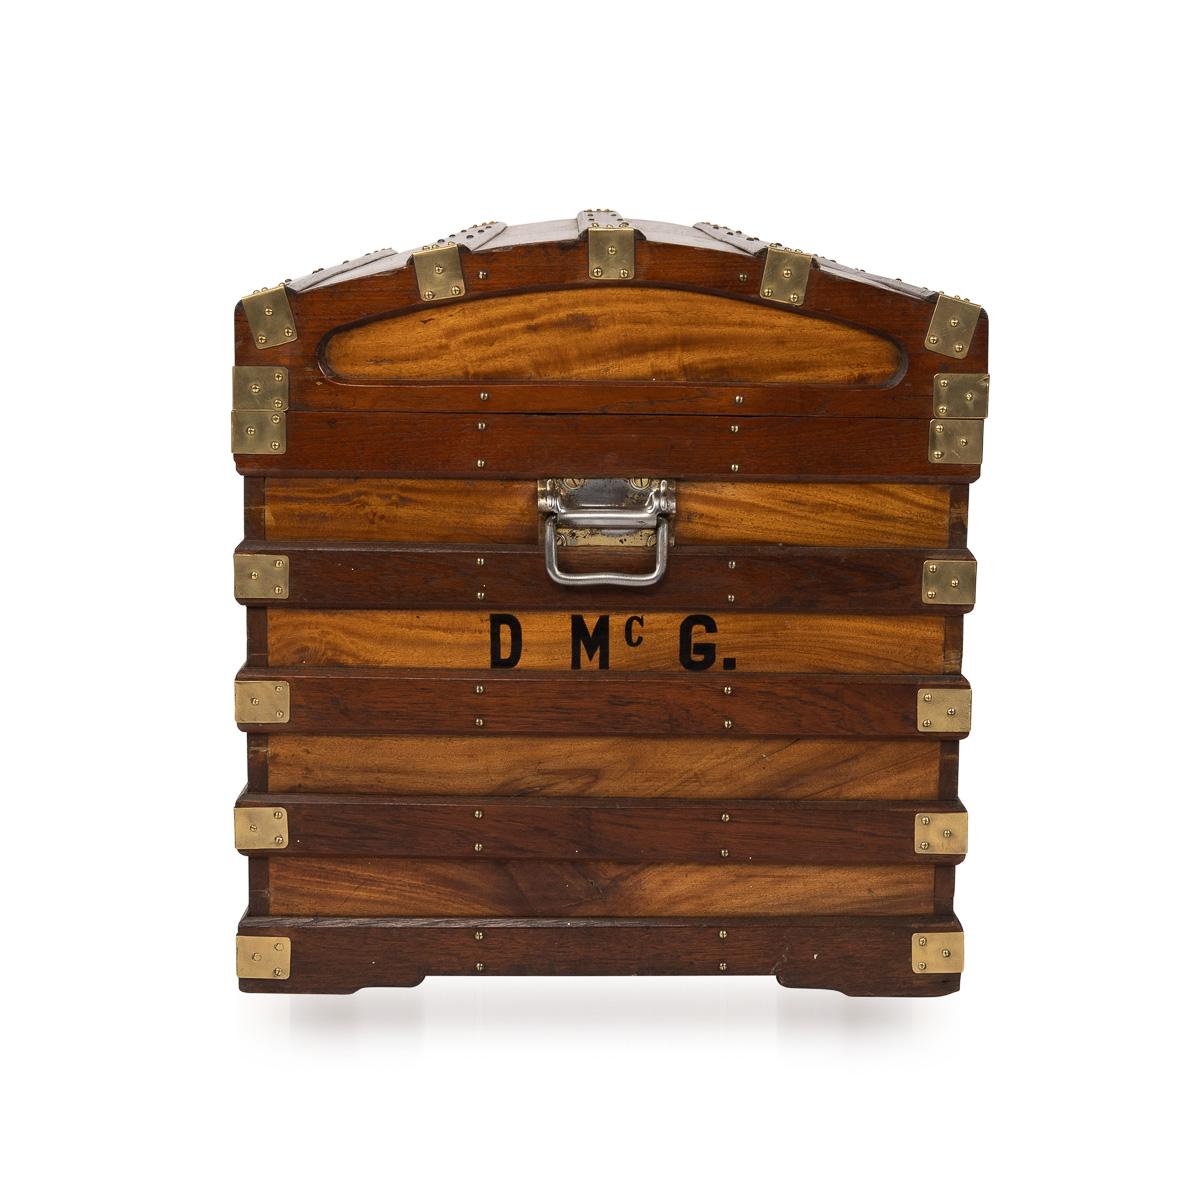 Antique late-19th century Teak and mahogany domed top ship's trunk, inscribed with initials, with brass strapped corners and fittings, stop handles of steel, with pair of original working locks with keys.

